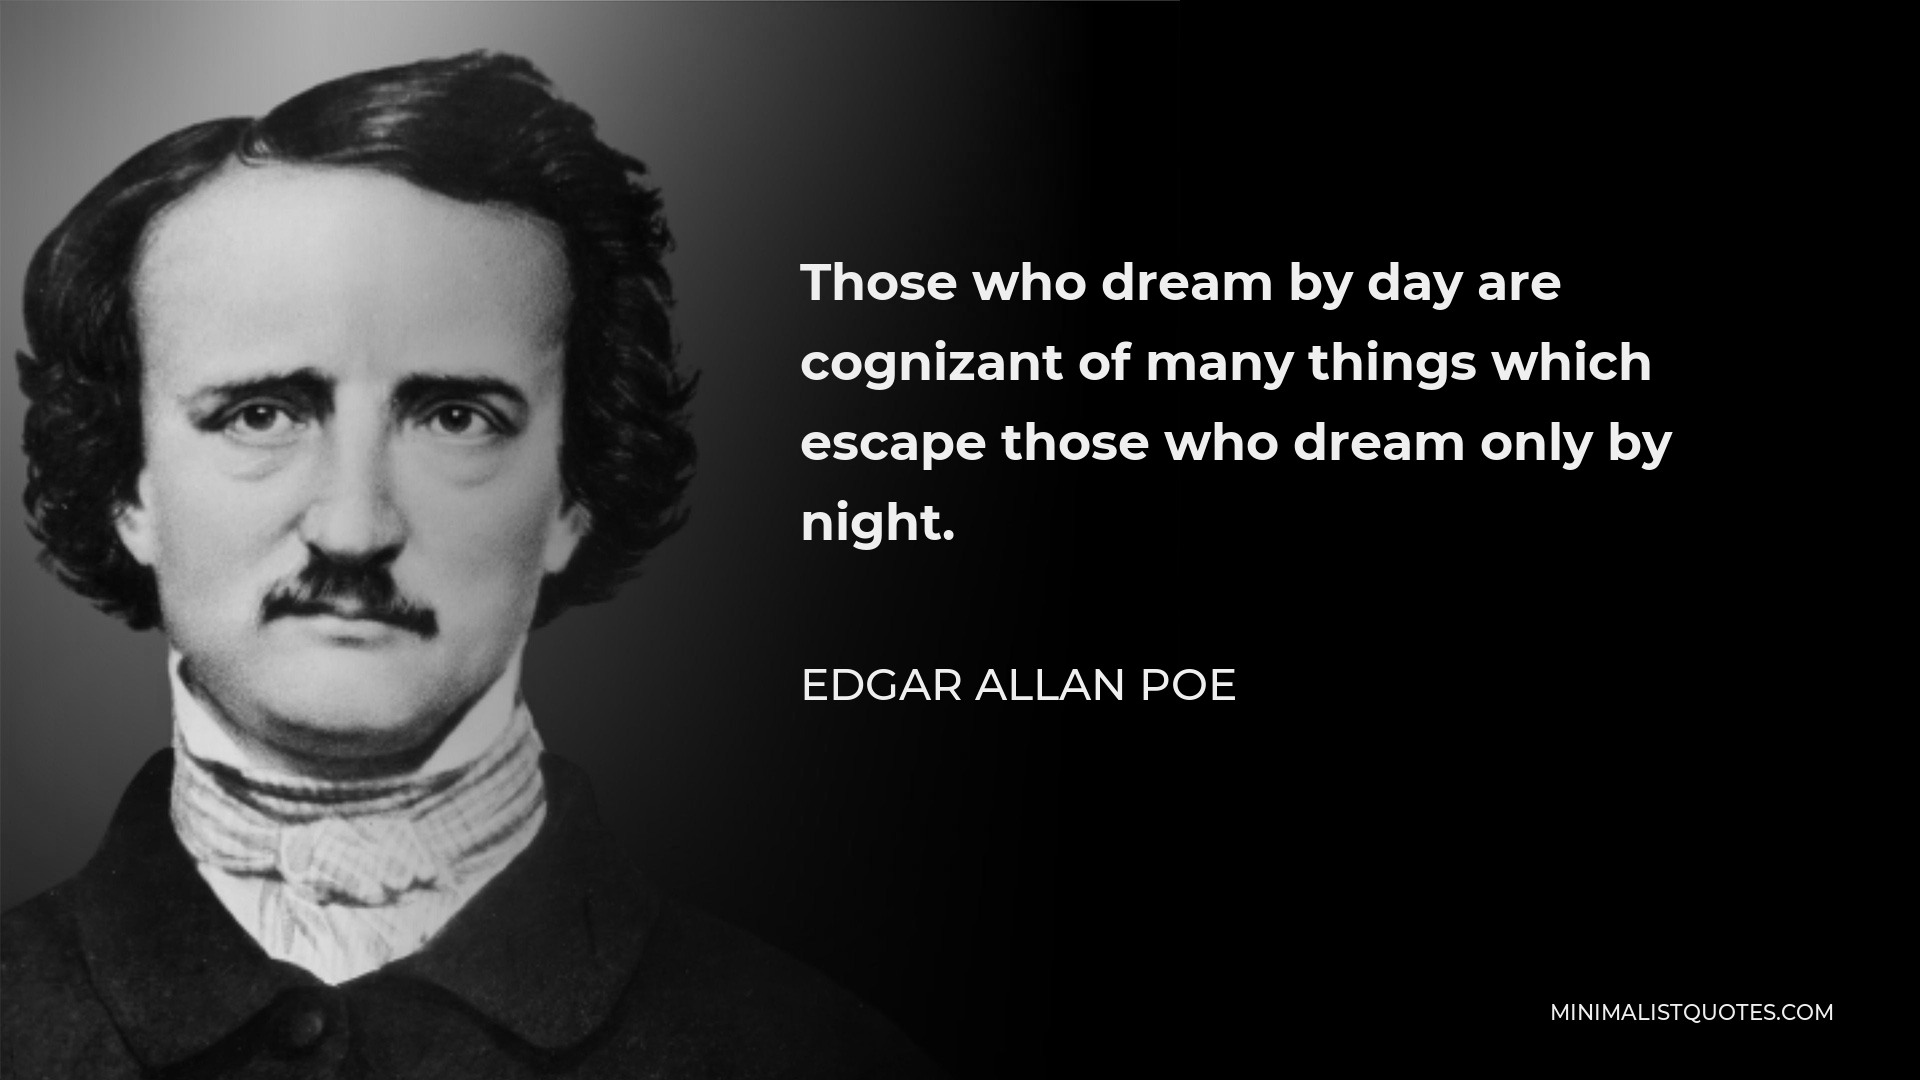 Those who dream by day are cognizant of many things which escape those who  dream only by night - ART FLAIR